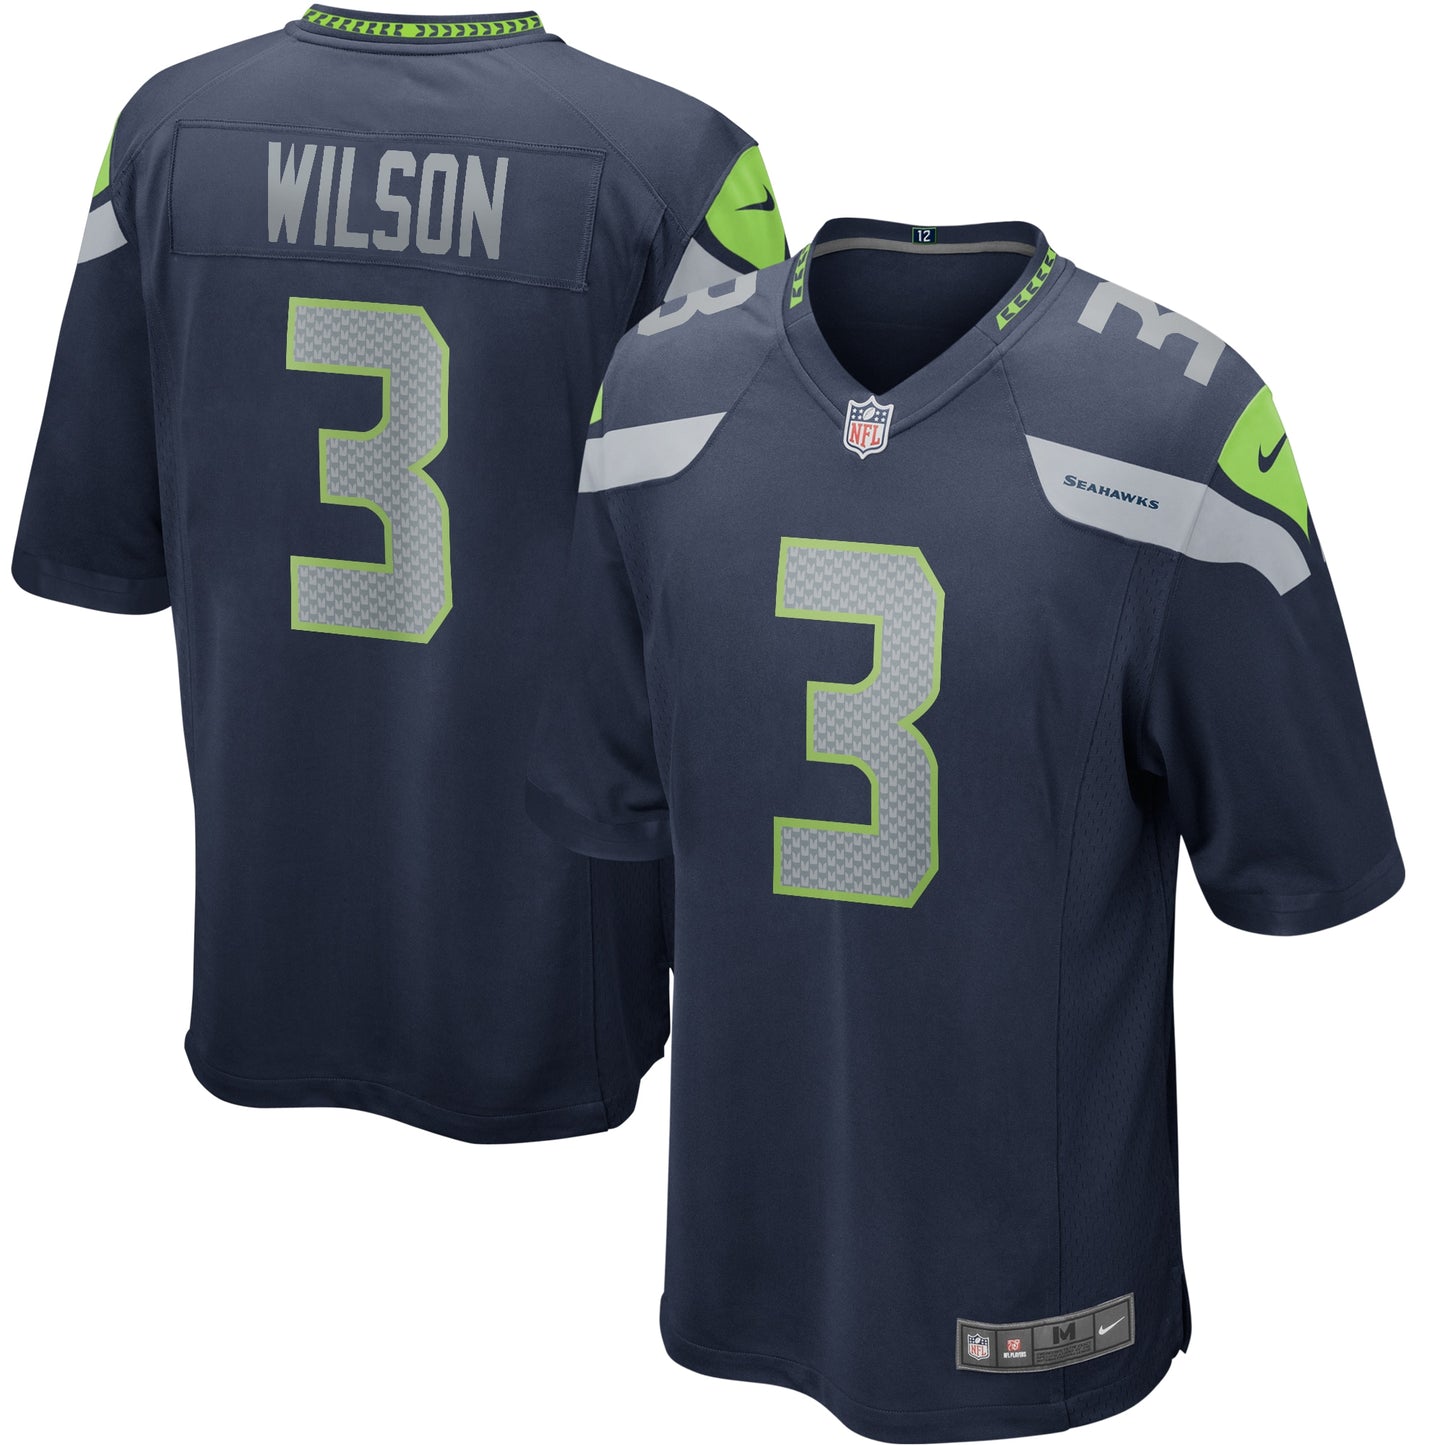 Russell Wilson Seattle Seahawks Nike Game Player Jersey - College Navy